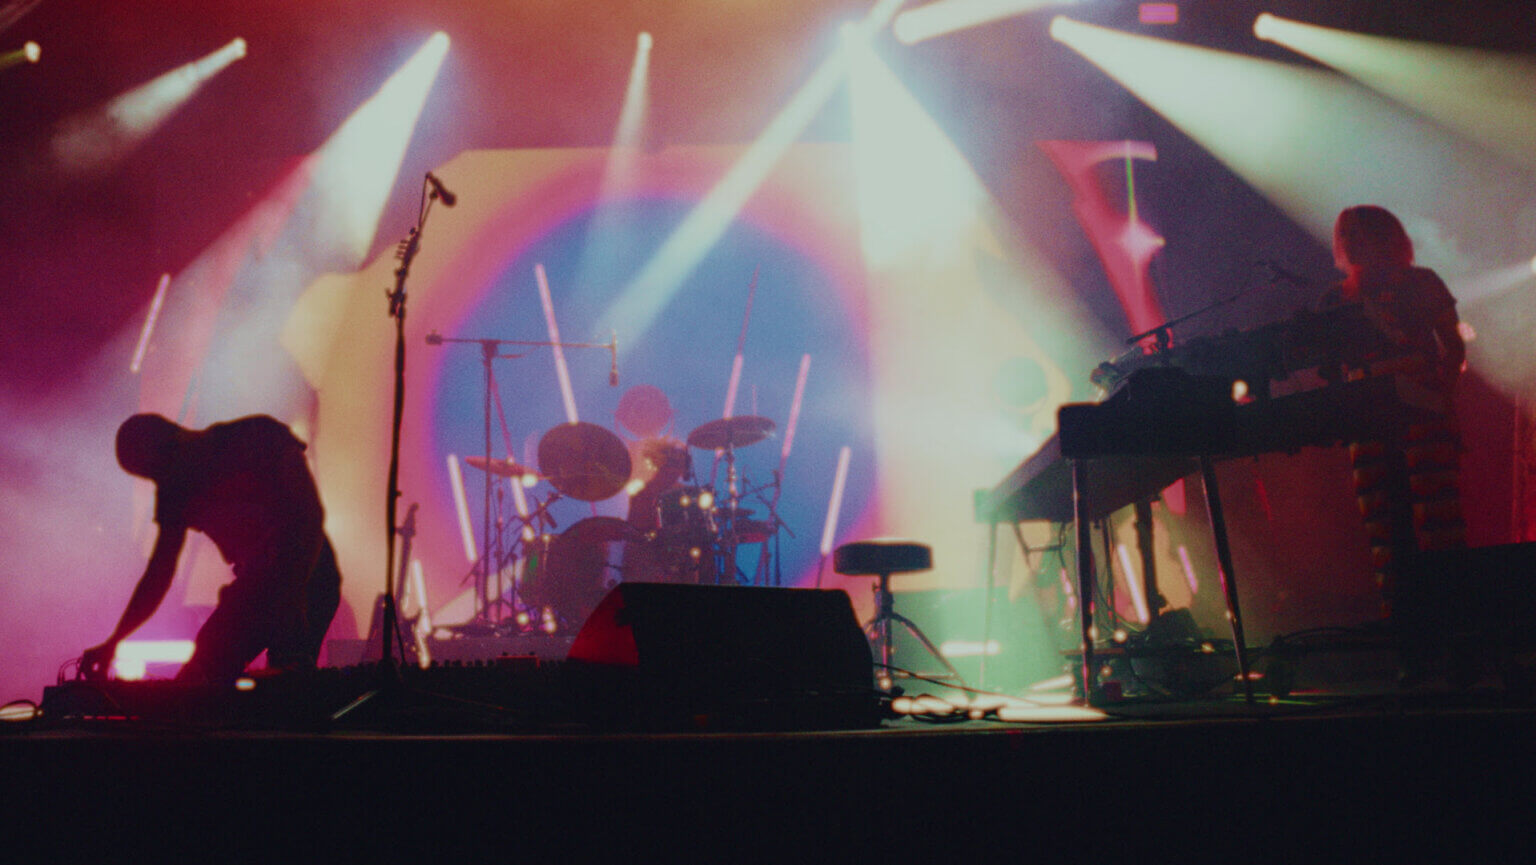 M83 Share "Sunny Boy” Tour Video. The tour archive video, shot and edited by Joey Armario, for the Fantasy track